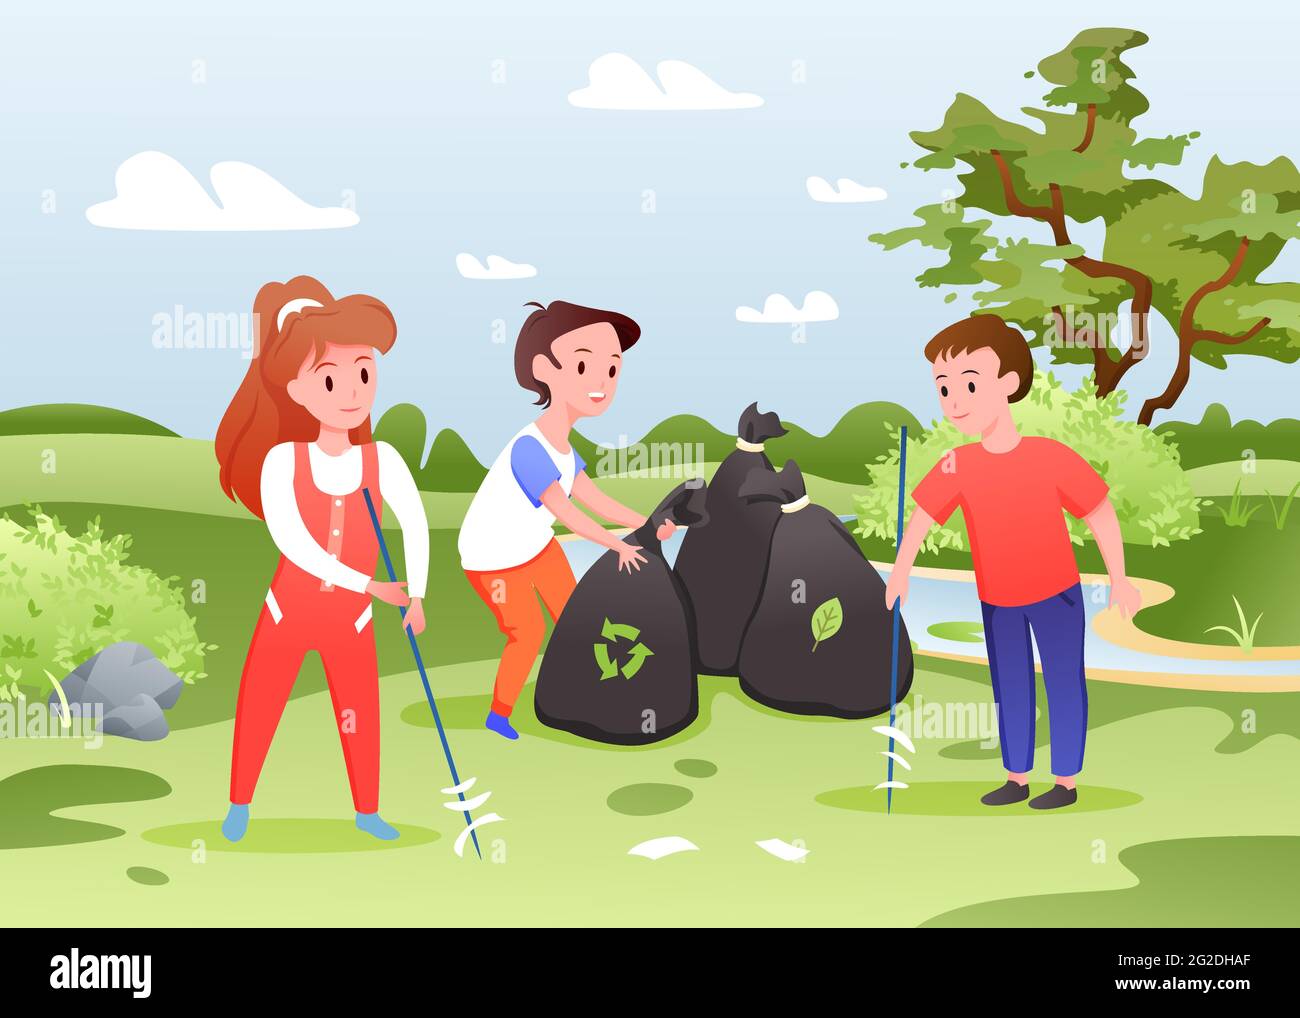 Kids collect garbage, group of boy and girl sort garbage, collecting waste in bags Stock Vector